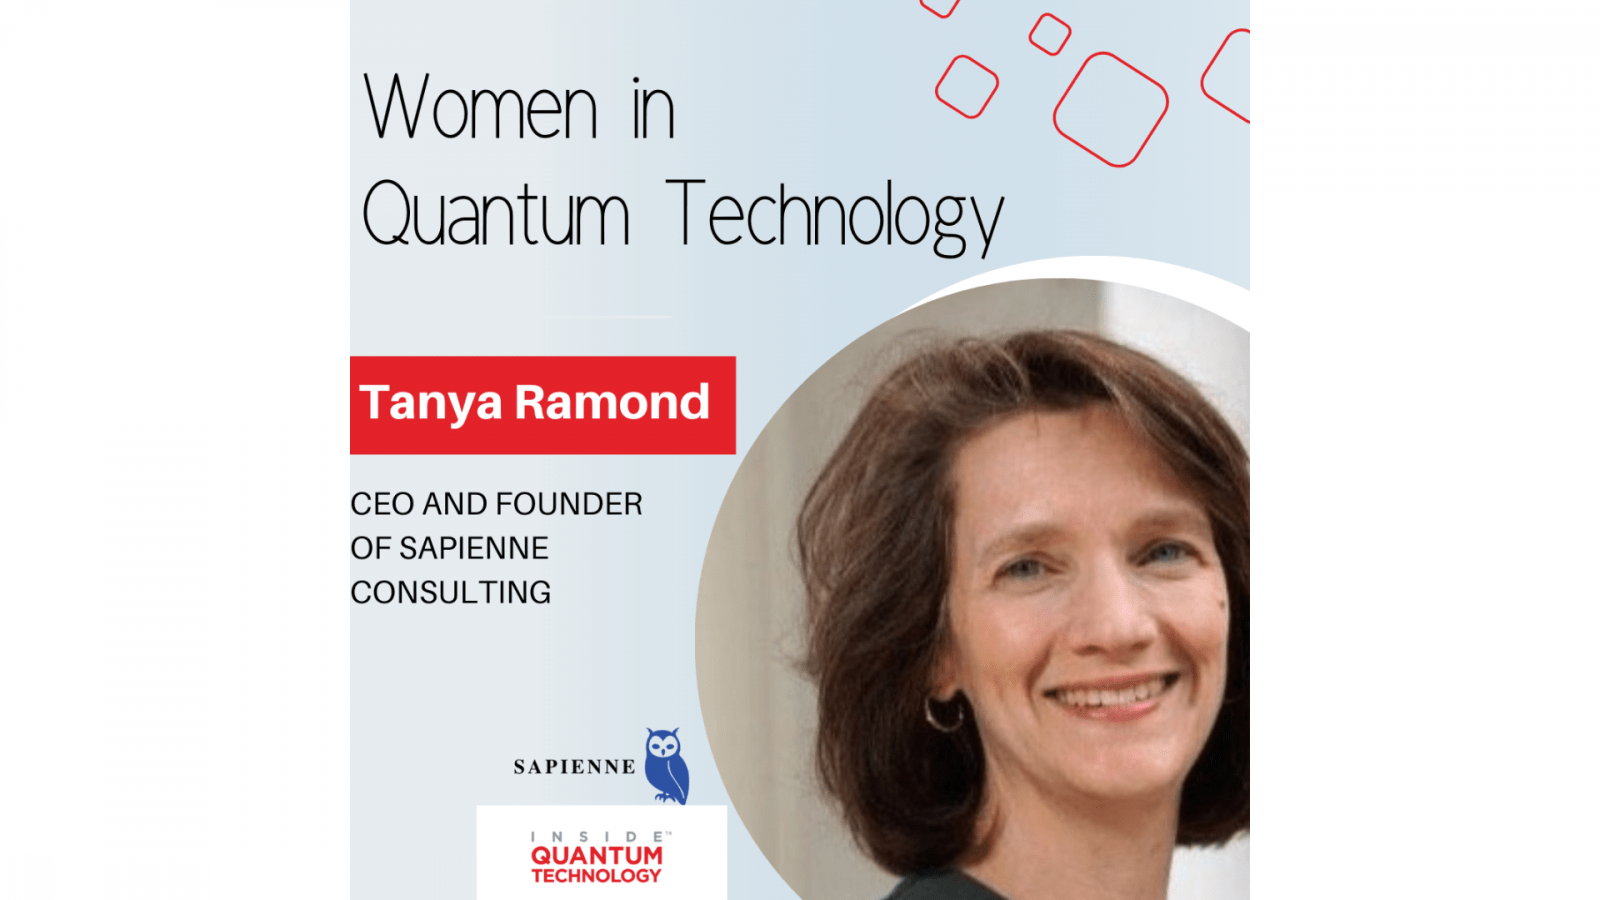 Tanya Ramond, CEO and Founder of Sapienne Consulting, discusses her history and journey into the quantum industry.